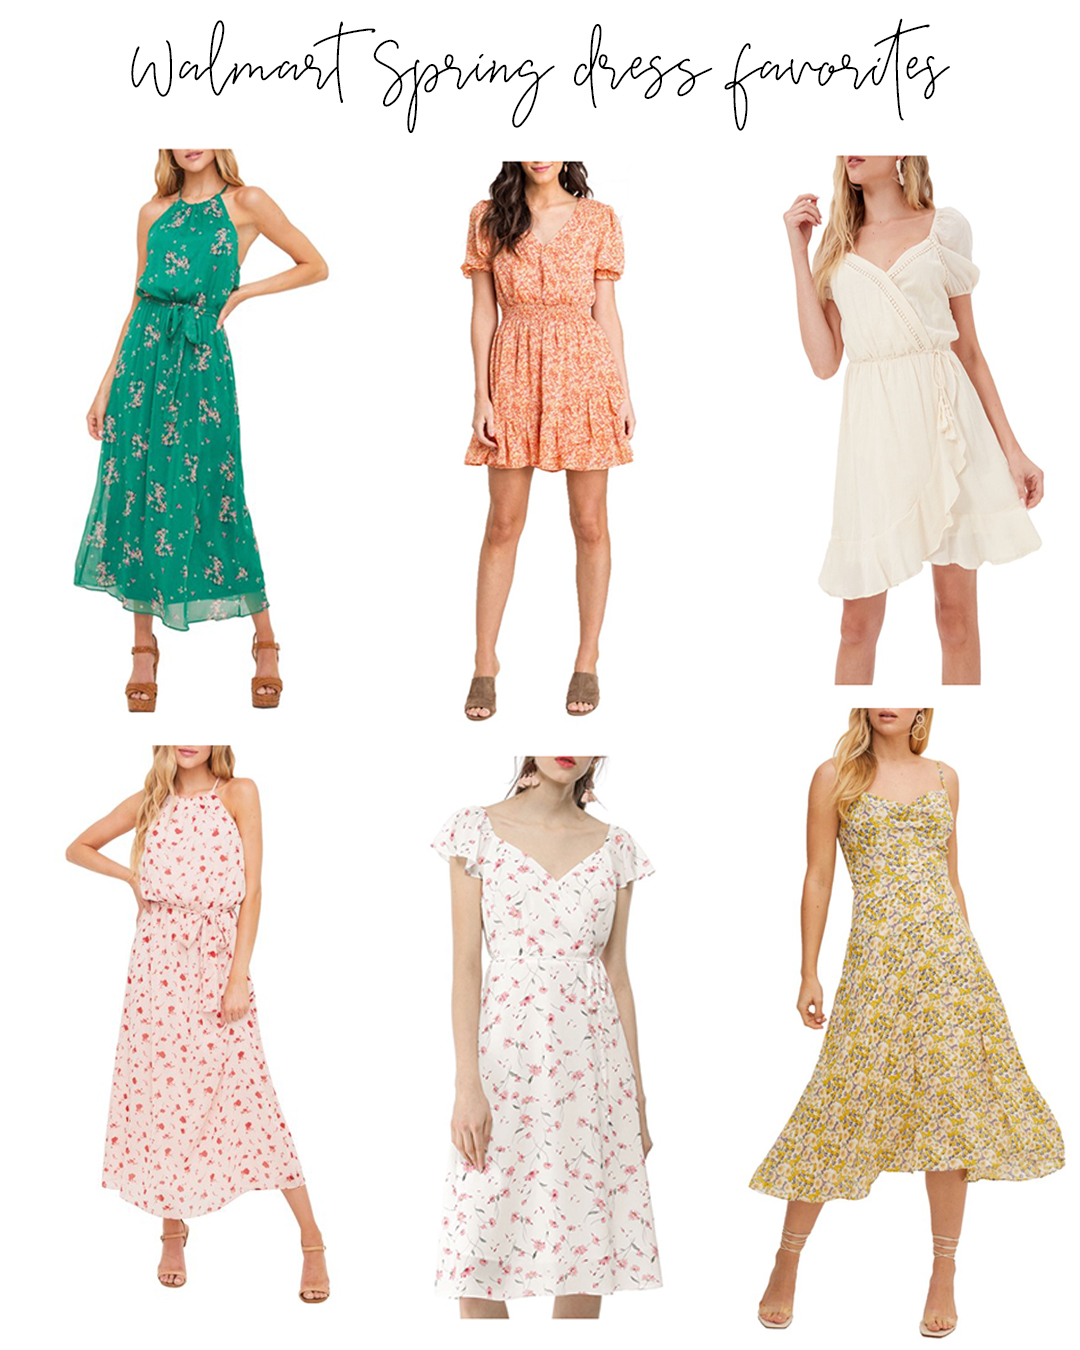 Affordable spring dresses under $50 - roundup of some of my favorite new styles for less. Spring and Summer dress looks + Walmart+ review.